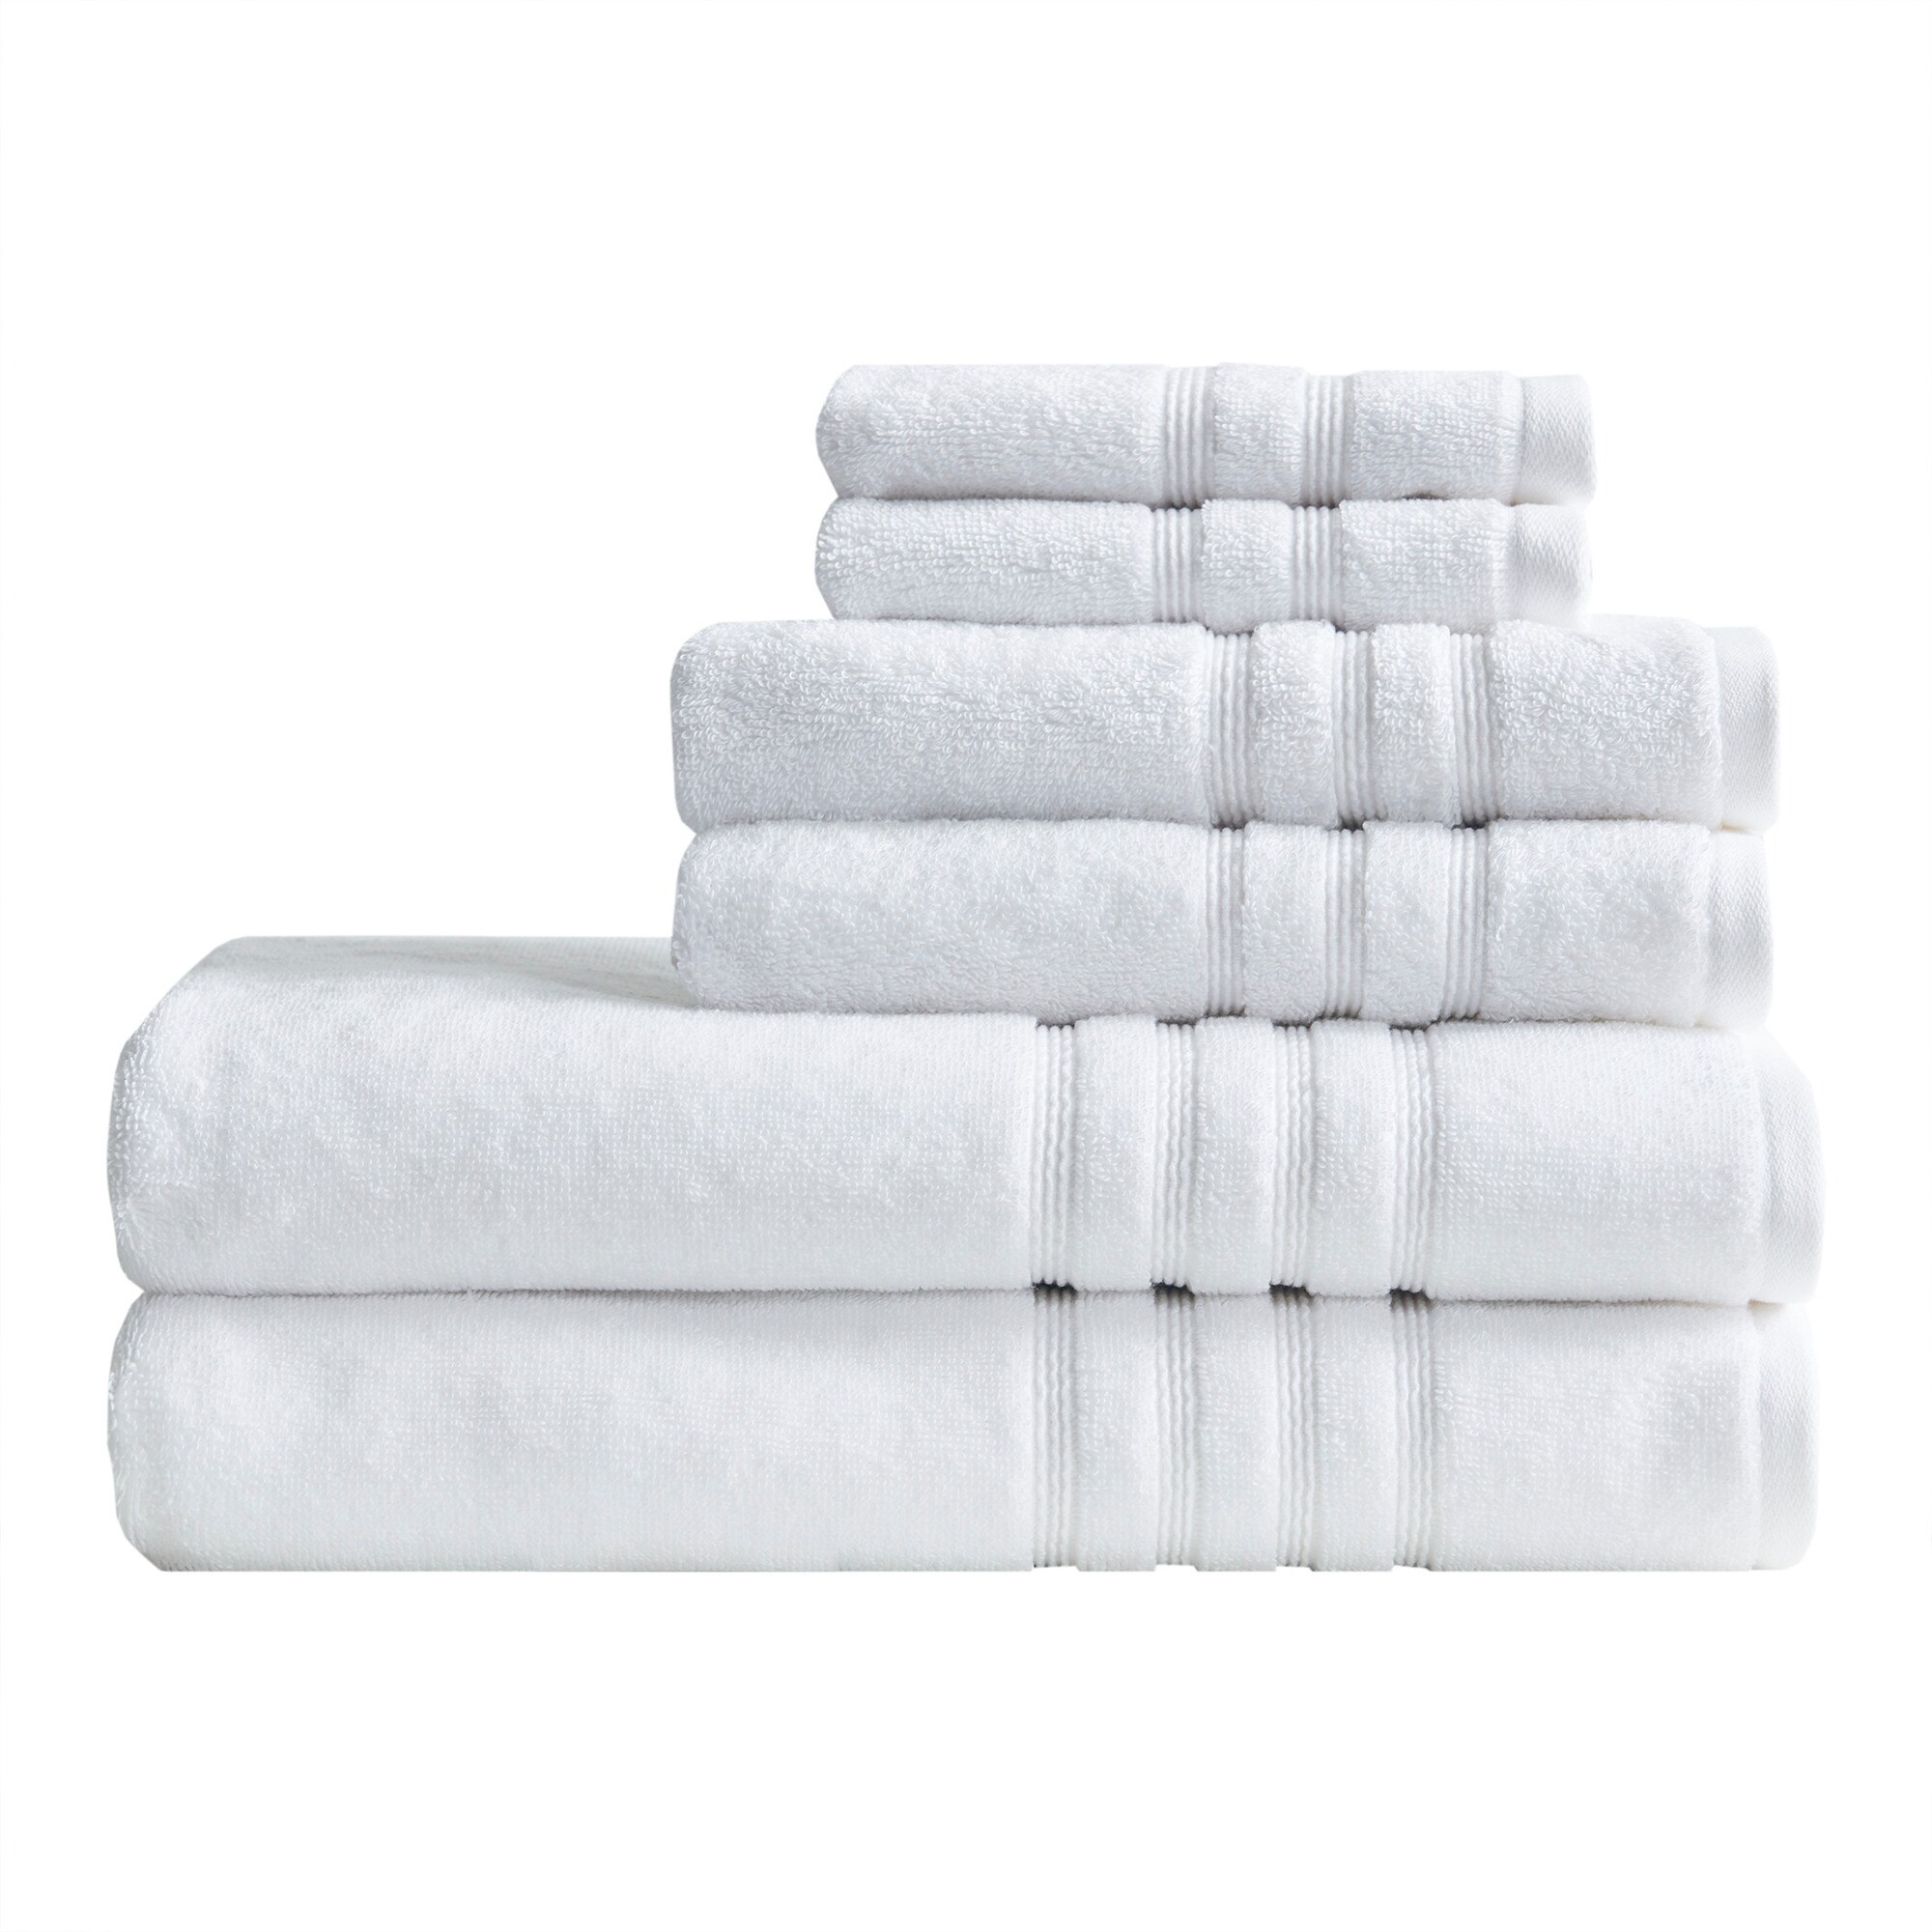 https://ak1.ostkcdn.com/images/products/is/images/direct/f4423aba824fb4f14596475907fb179071819f8c/Nurture-Sustainable-Antimicrobial-6-Piece-Towel-Set-by-Clean-Spaces.jpg